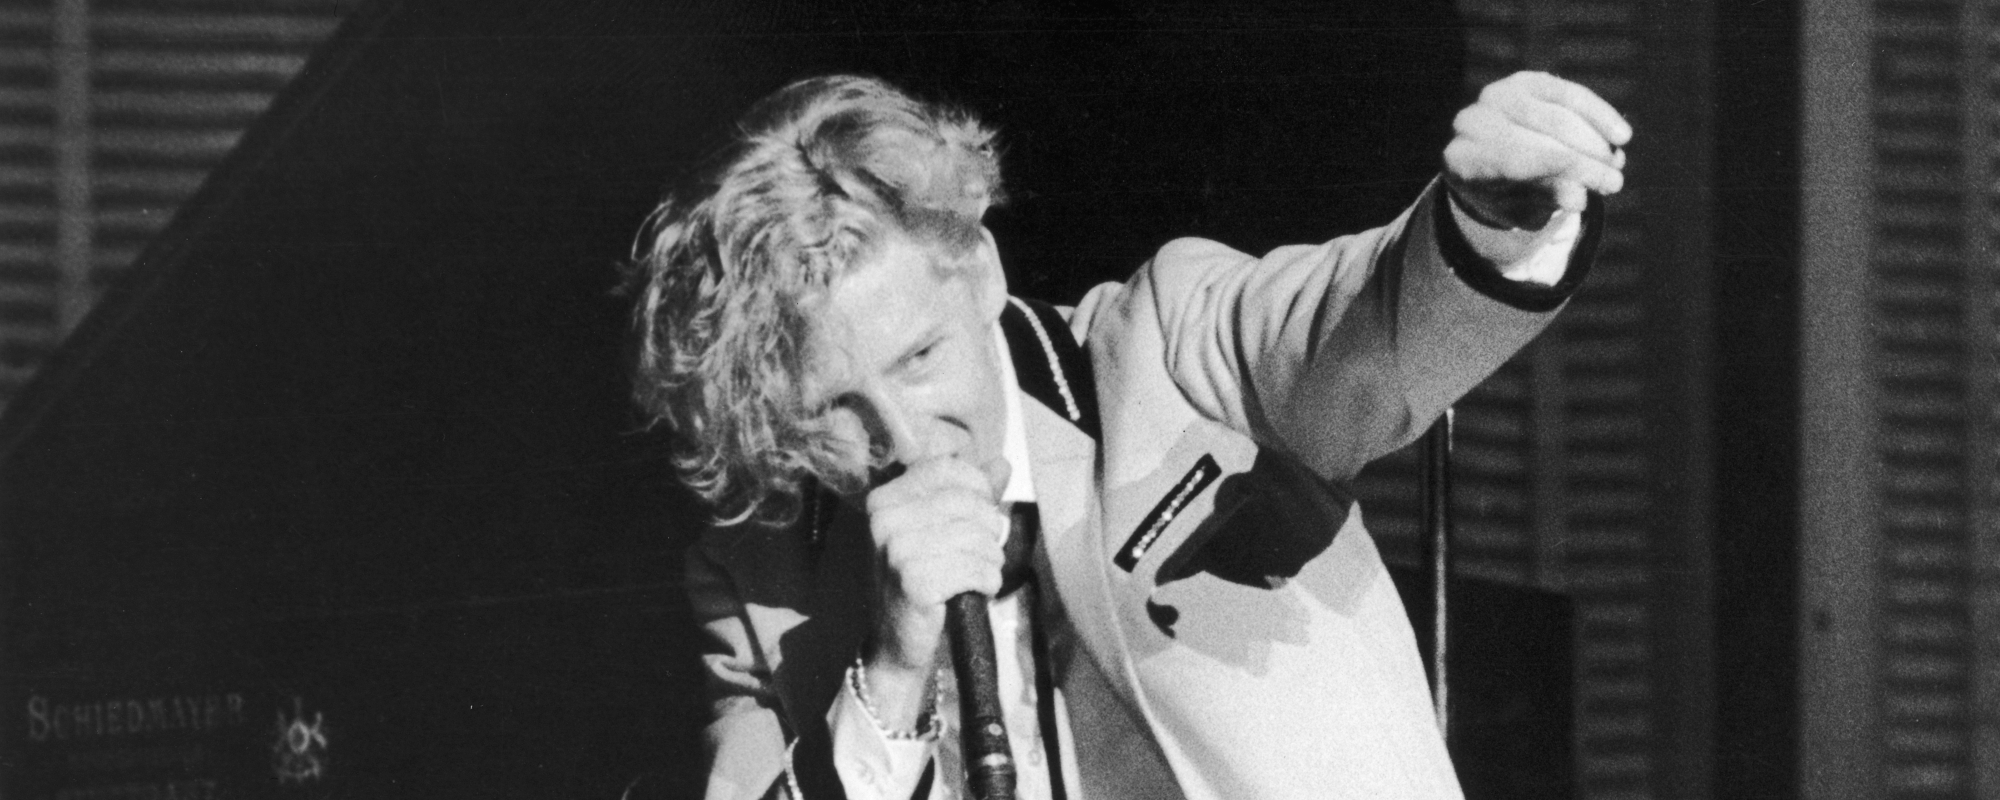 Remember When: Jerry Lee Lewis’ Electrifying TV Debut